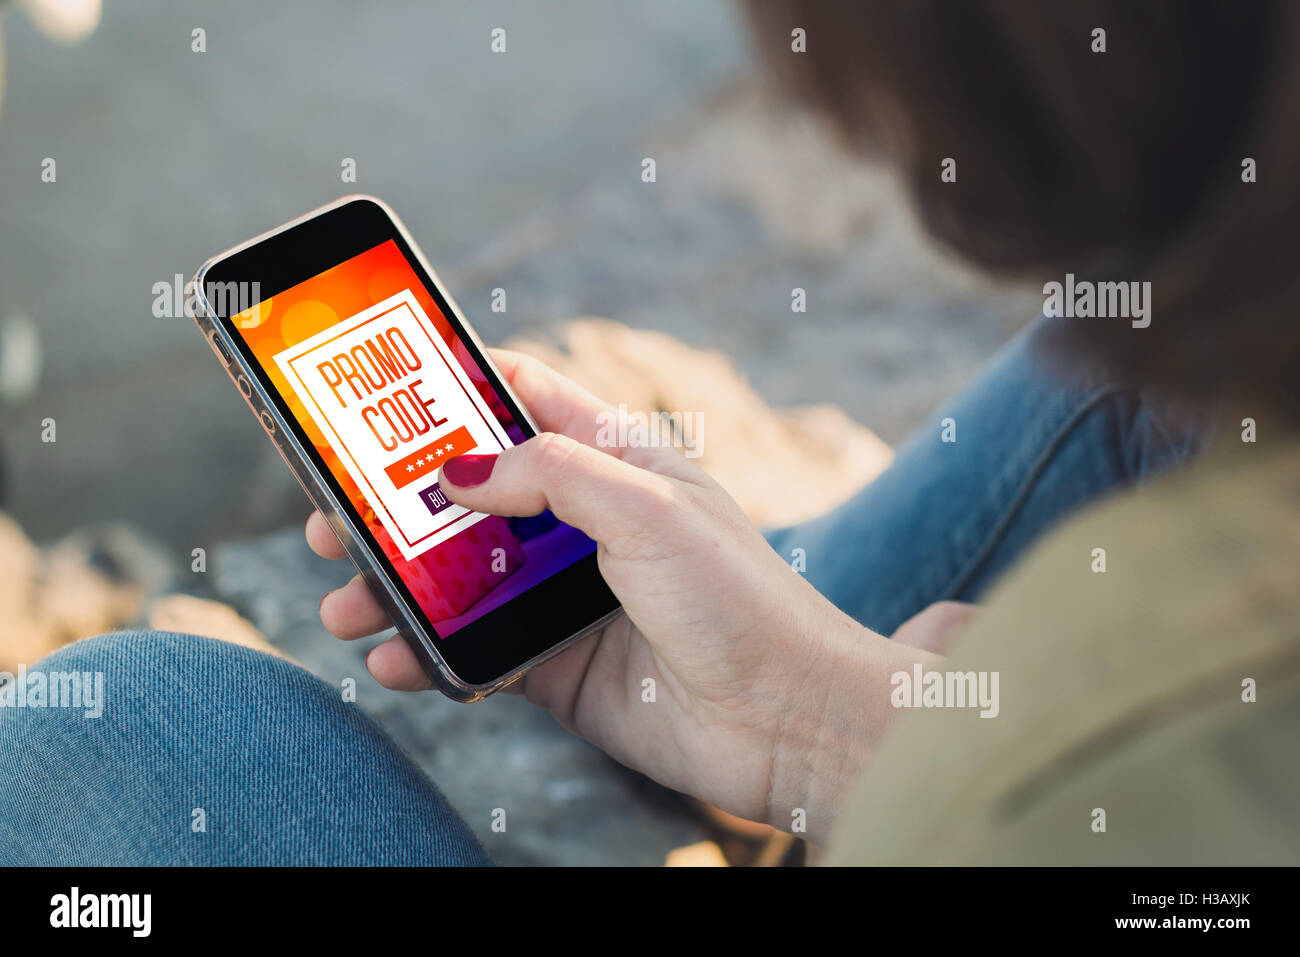 m-Commerce: woman holding a smartphone and buys using a promo code. All screen graphics are made up. Stock Photo